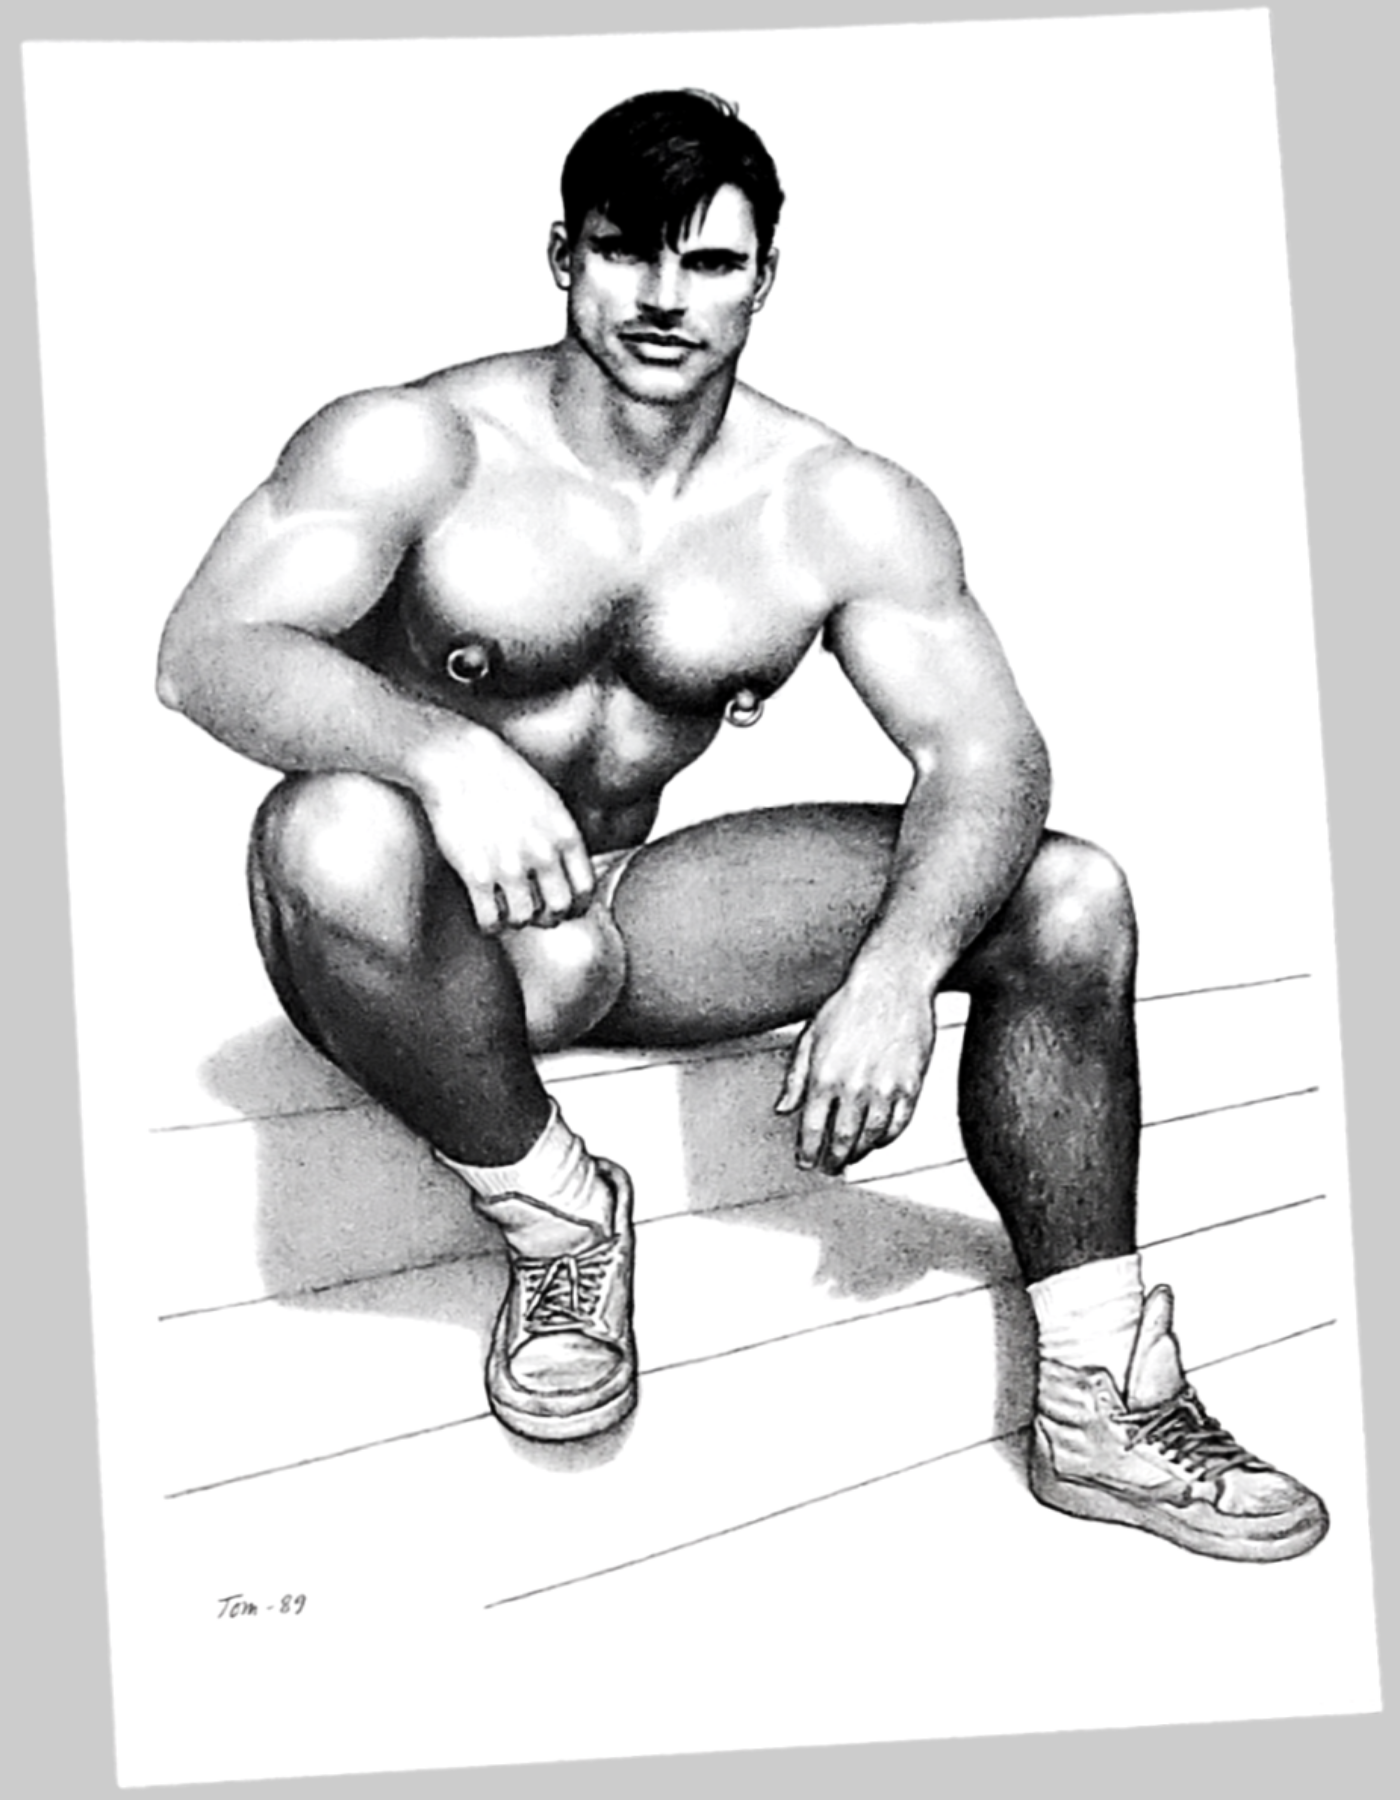 Authentic Tom Of Finland David A Beauty Poster For Sale In AREA51GALLERY New Orleans A Gay Owned Small Business